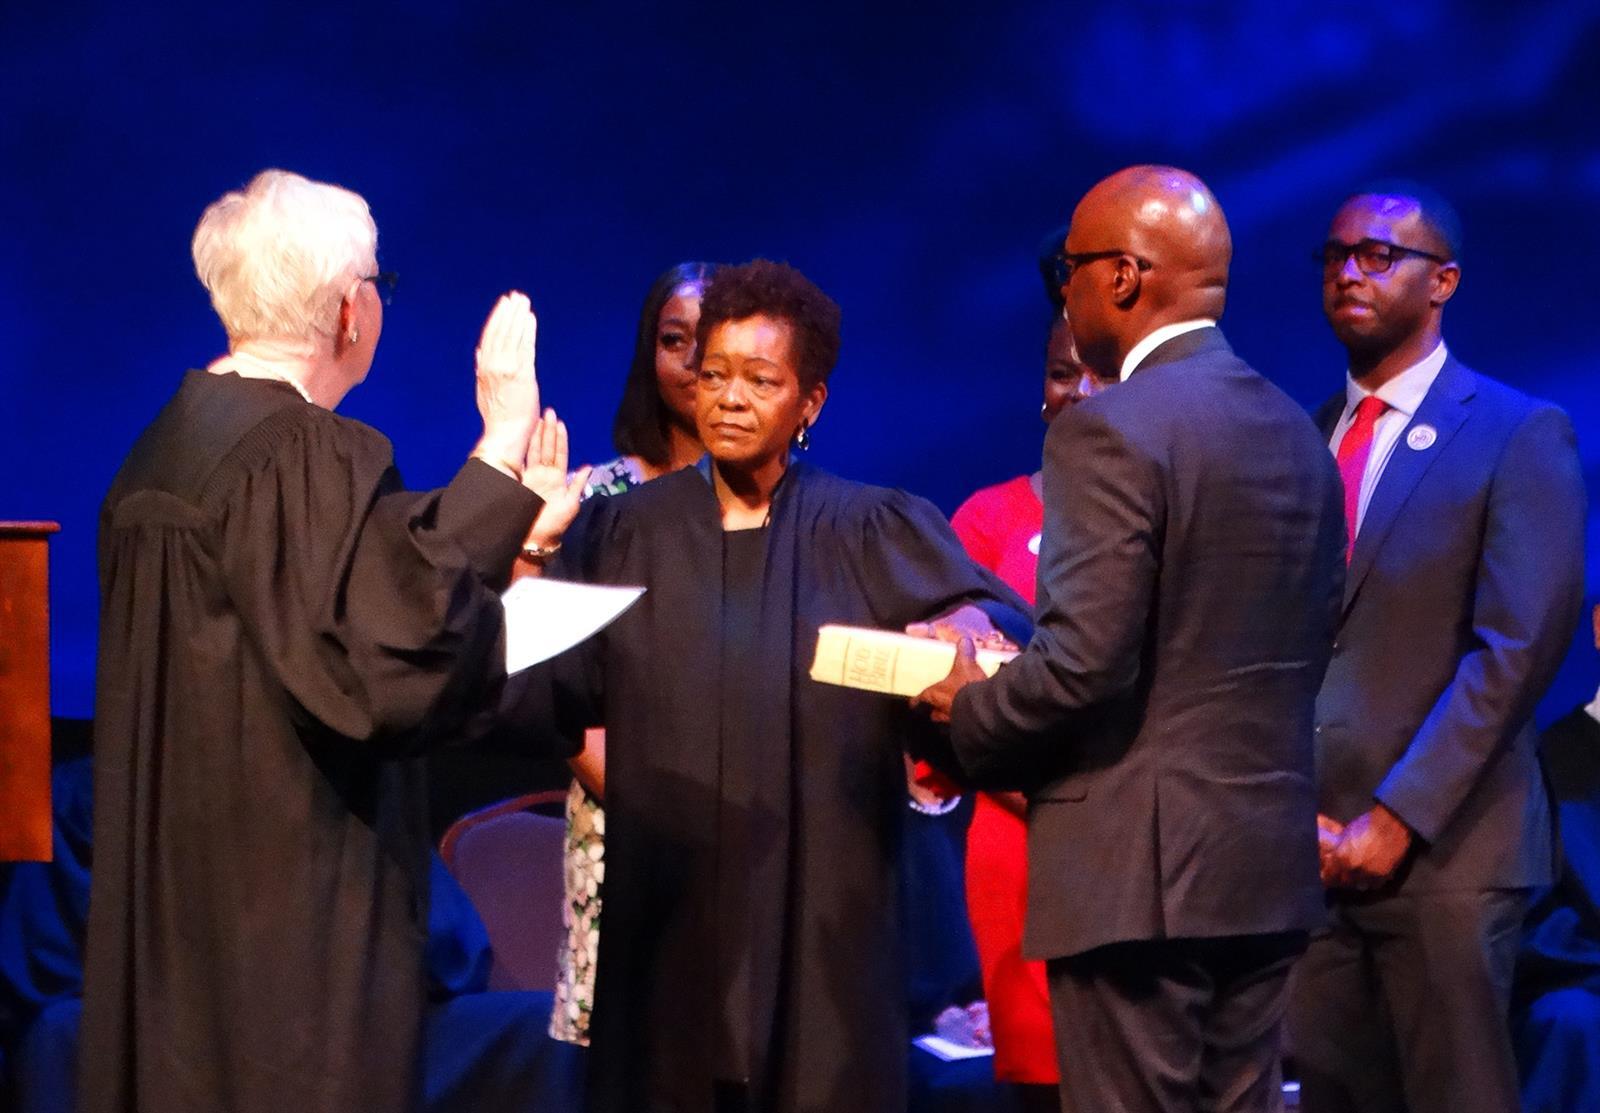 Justice Mary Jane Theis, left, administers the oath of office to Lisa Holder White, making her the first Black woman to serve on the Illinois Supreme Court. Holder White's husband James White holds a Bible while their son Brett White looks on.